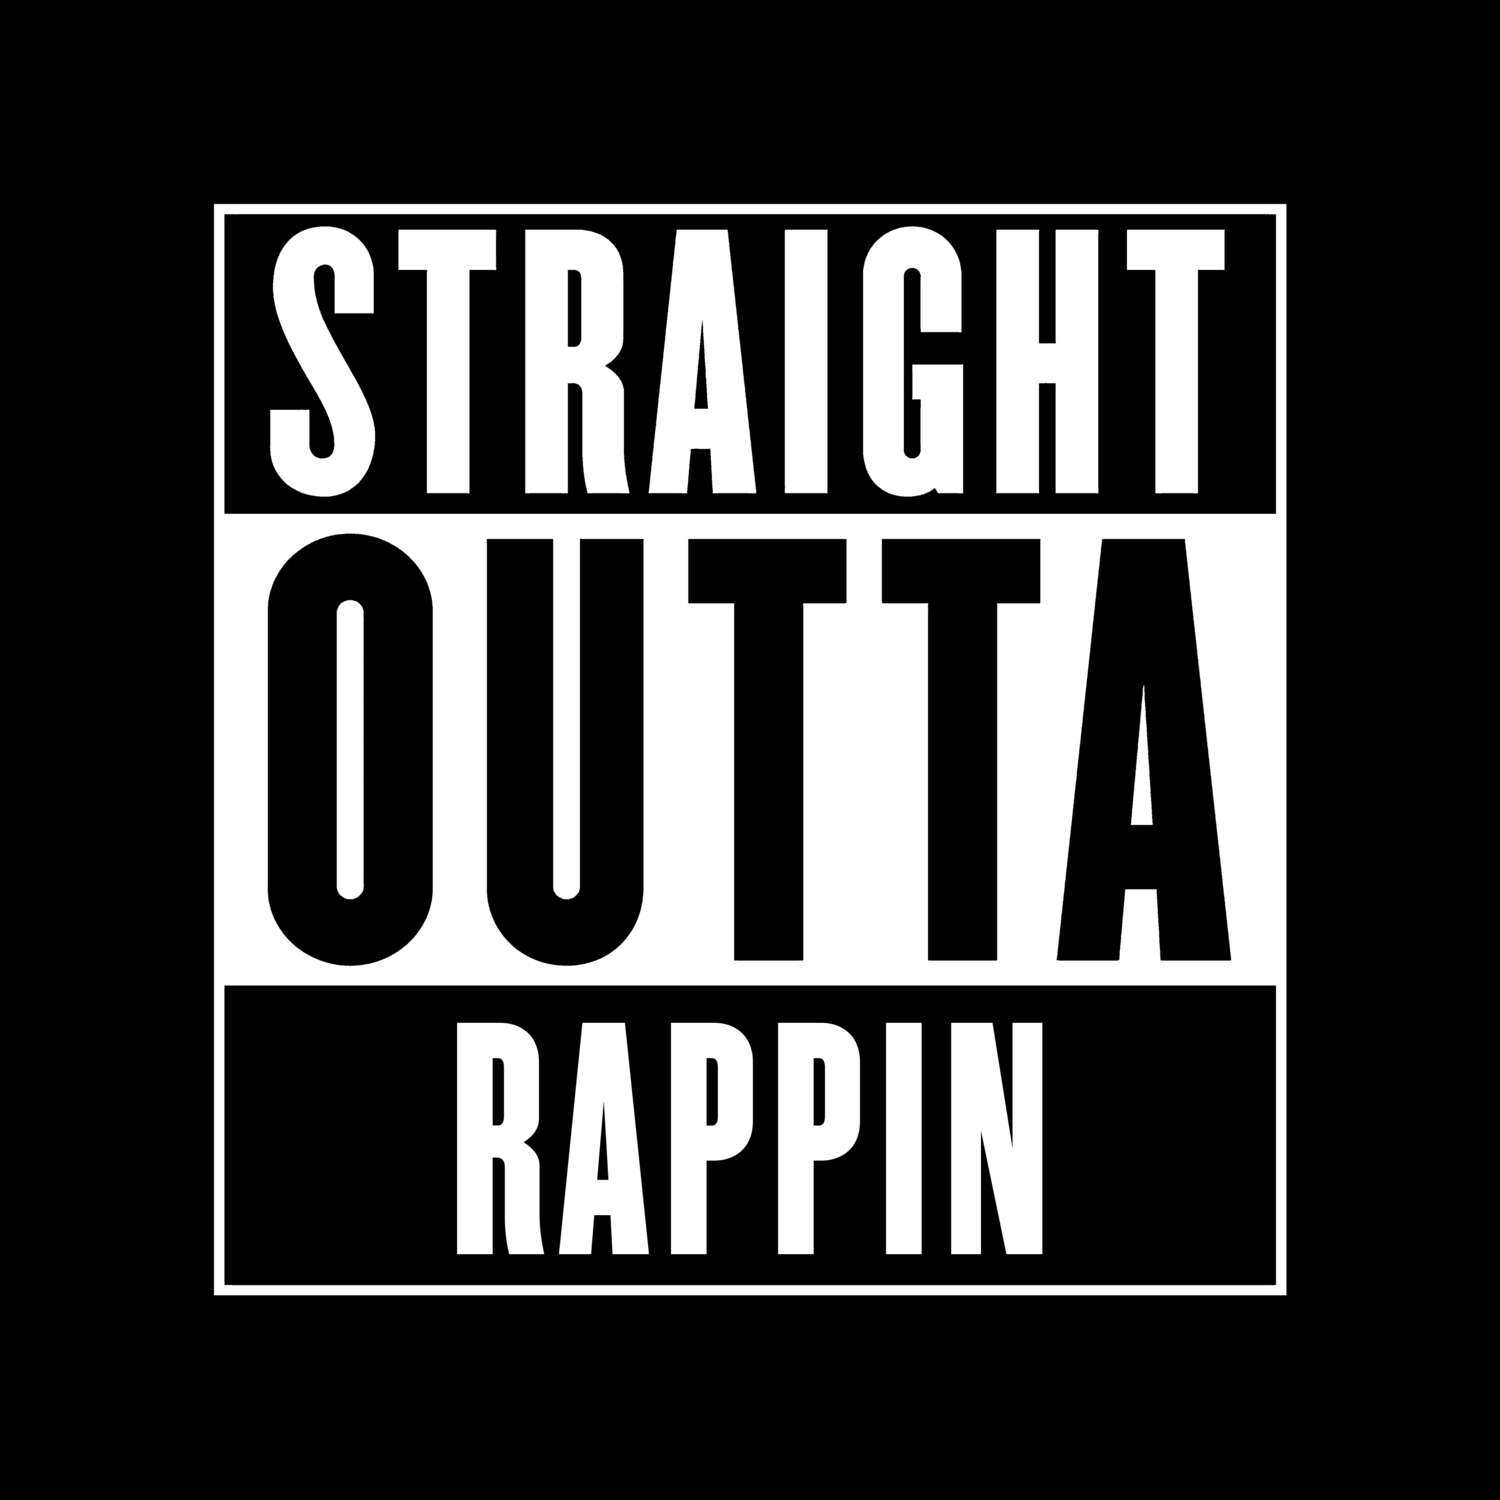 Rappin T-Shirt »Straight Outta«